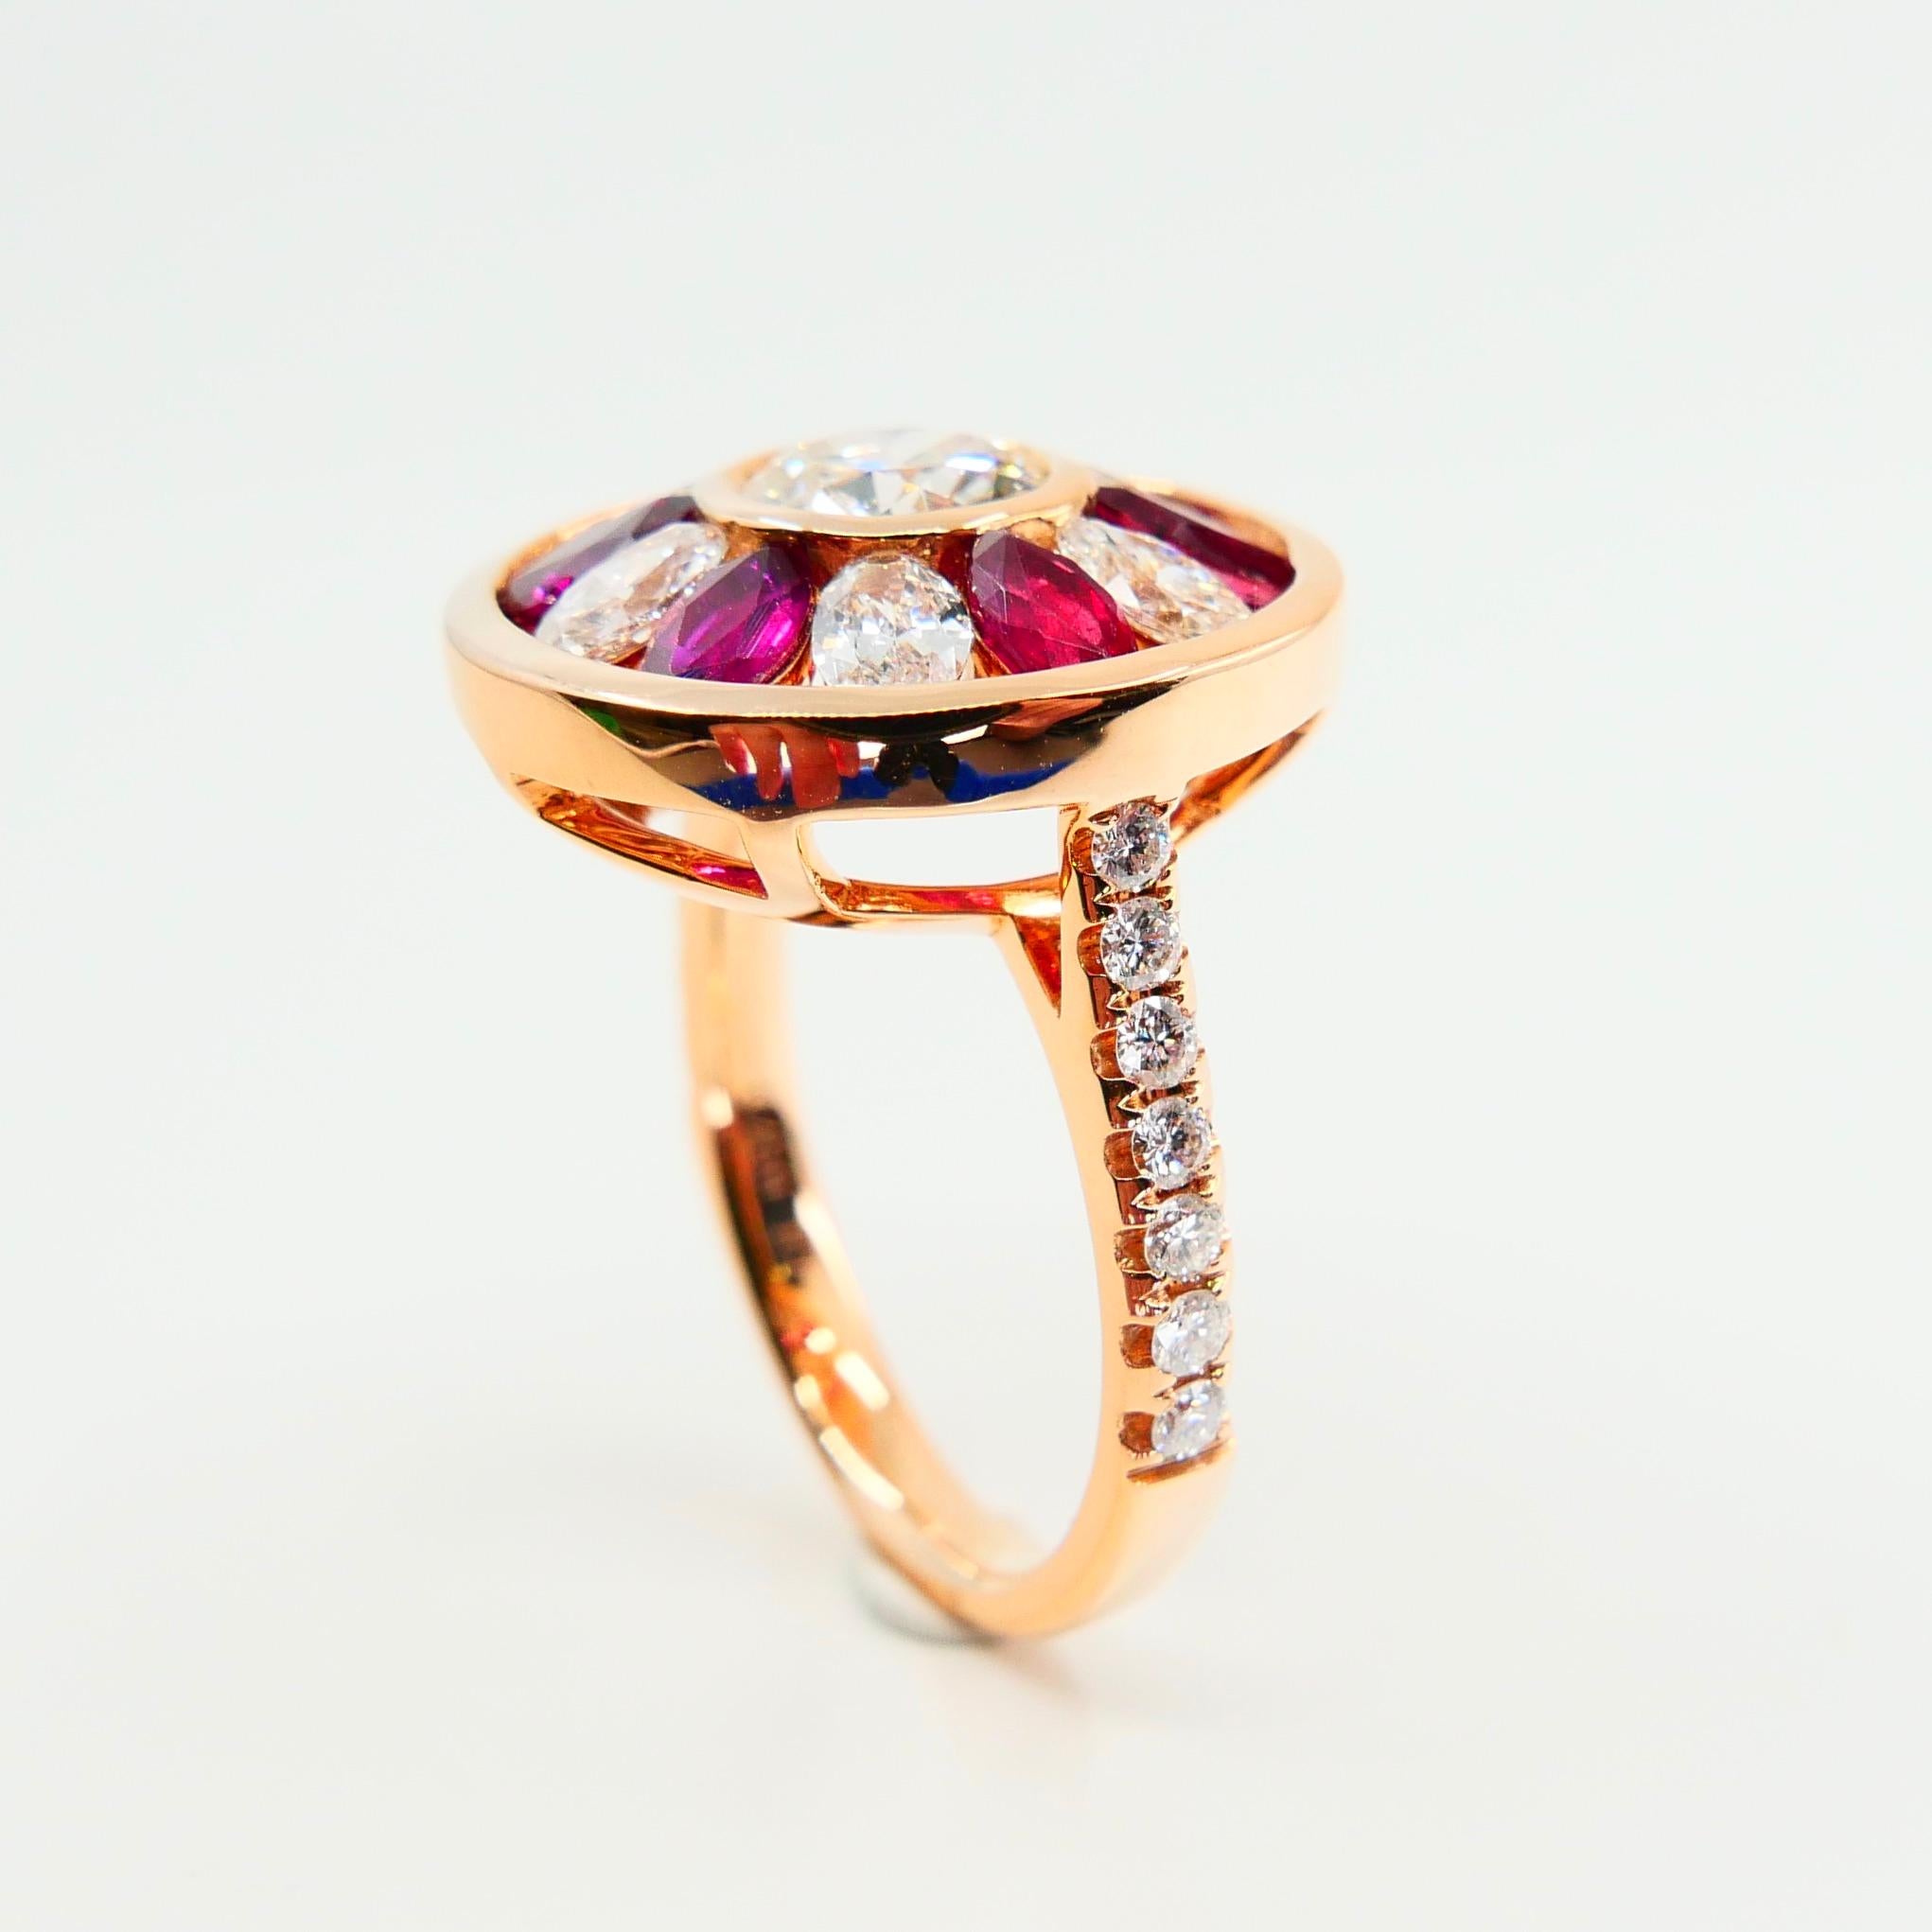 Certified 1.53 Cts Natural Burma Ruby & Old Cut Diamond Ring, 18K Rose Gold 7